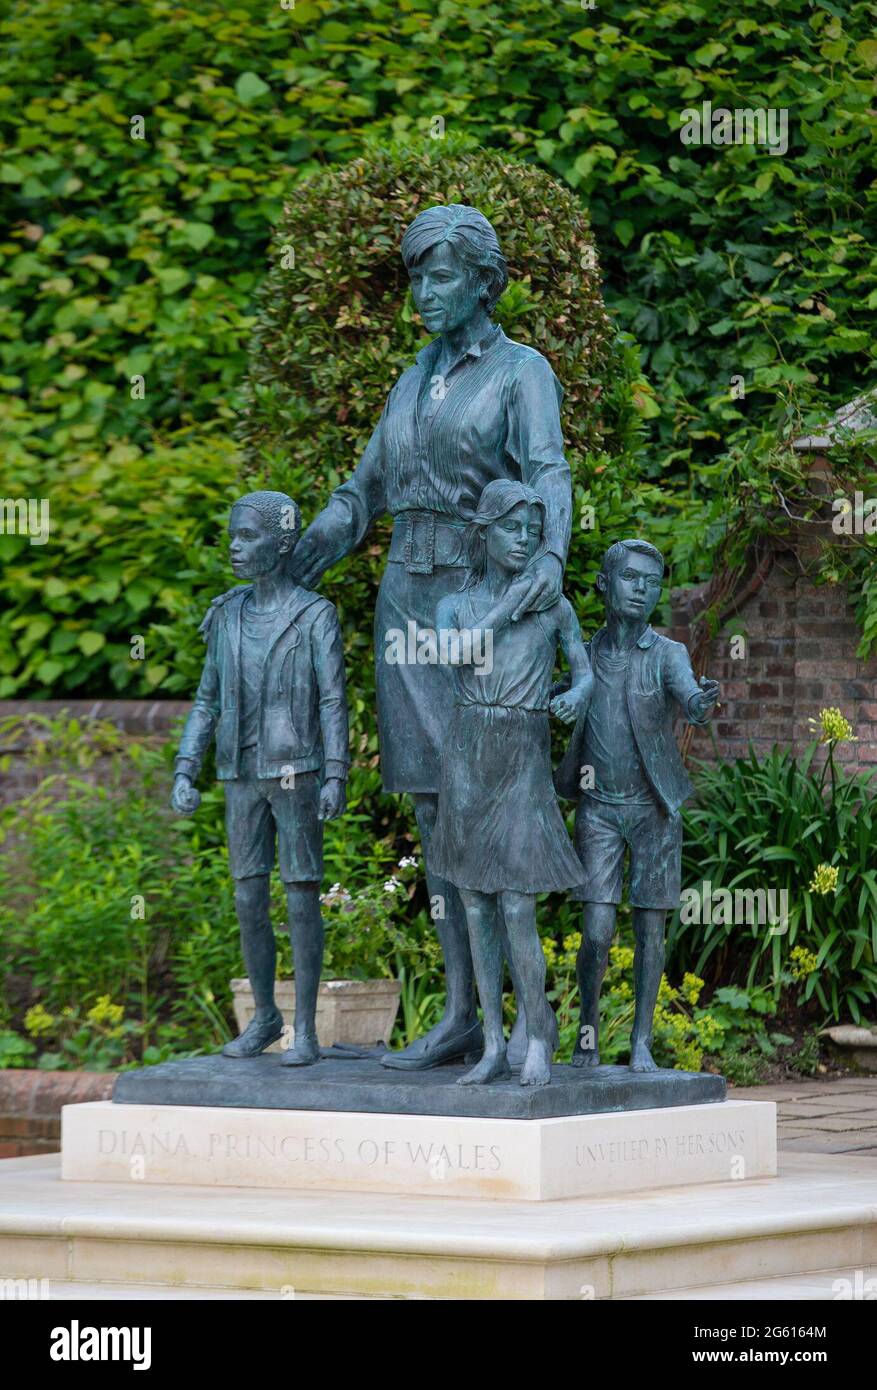 The statue of Diana, Princess of Wales, by artist Ian Rank-Broadley, in the  Sunken Garden at Kensington Palace, London. The bronze statue depicts the  princess surrounded by three children to represent the 